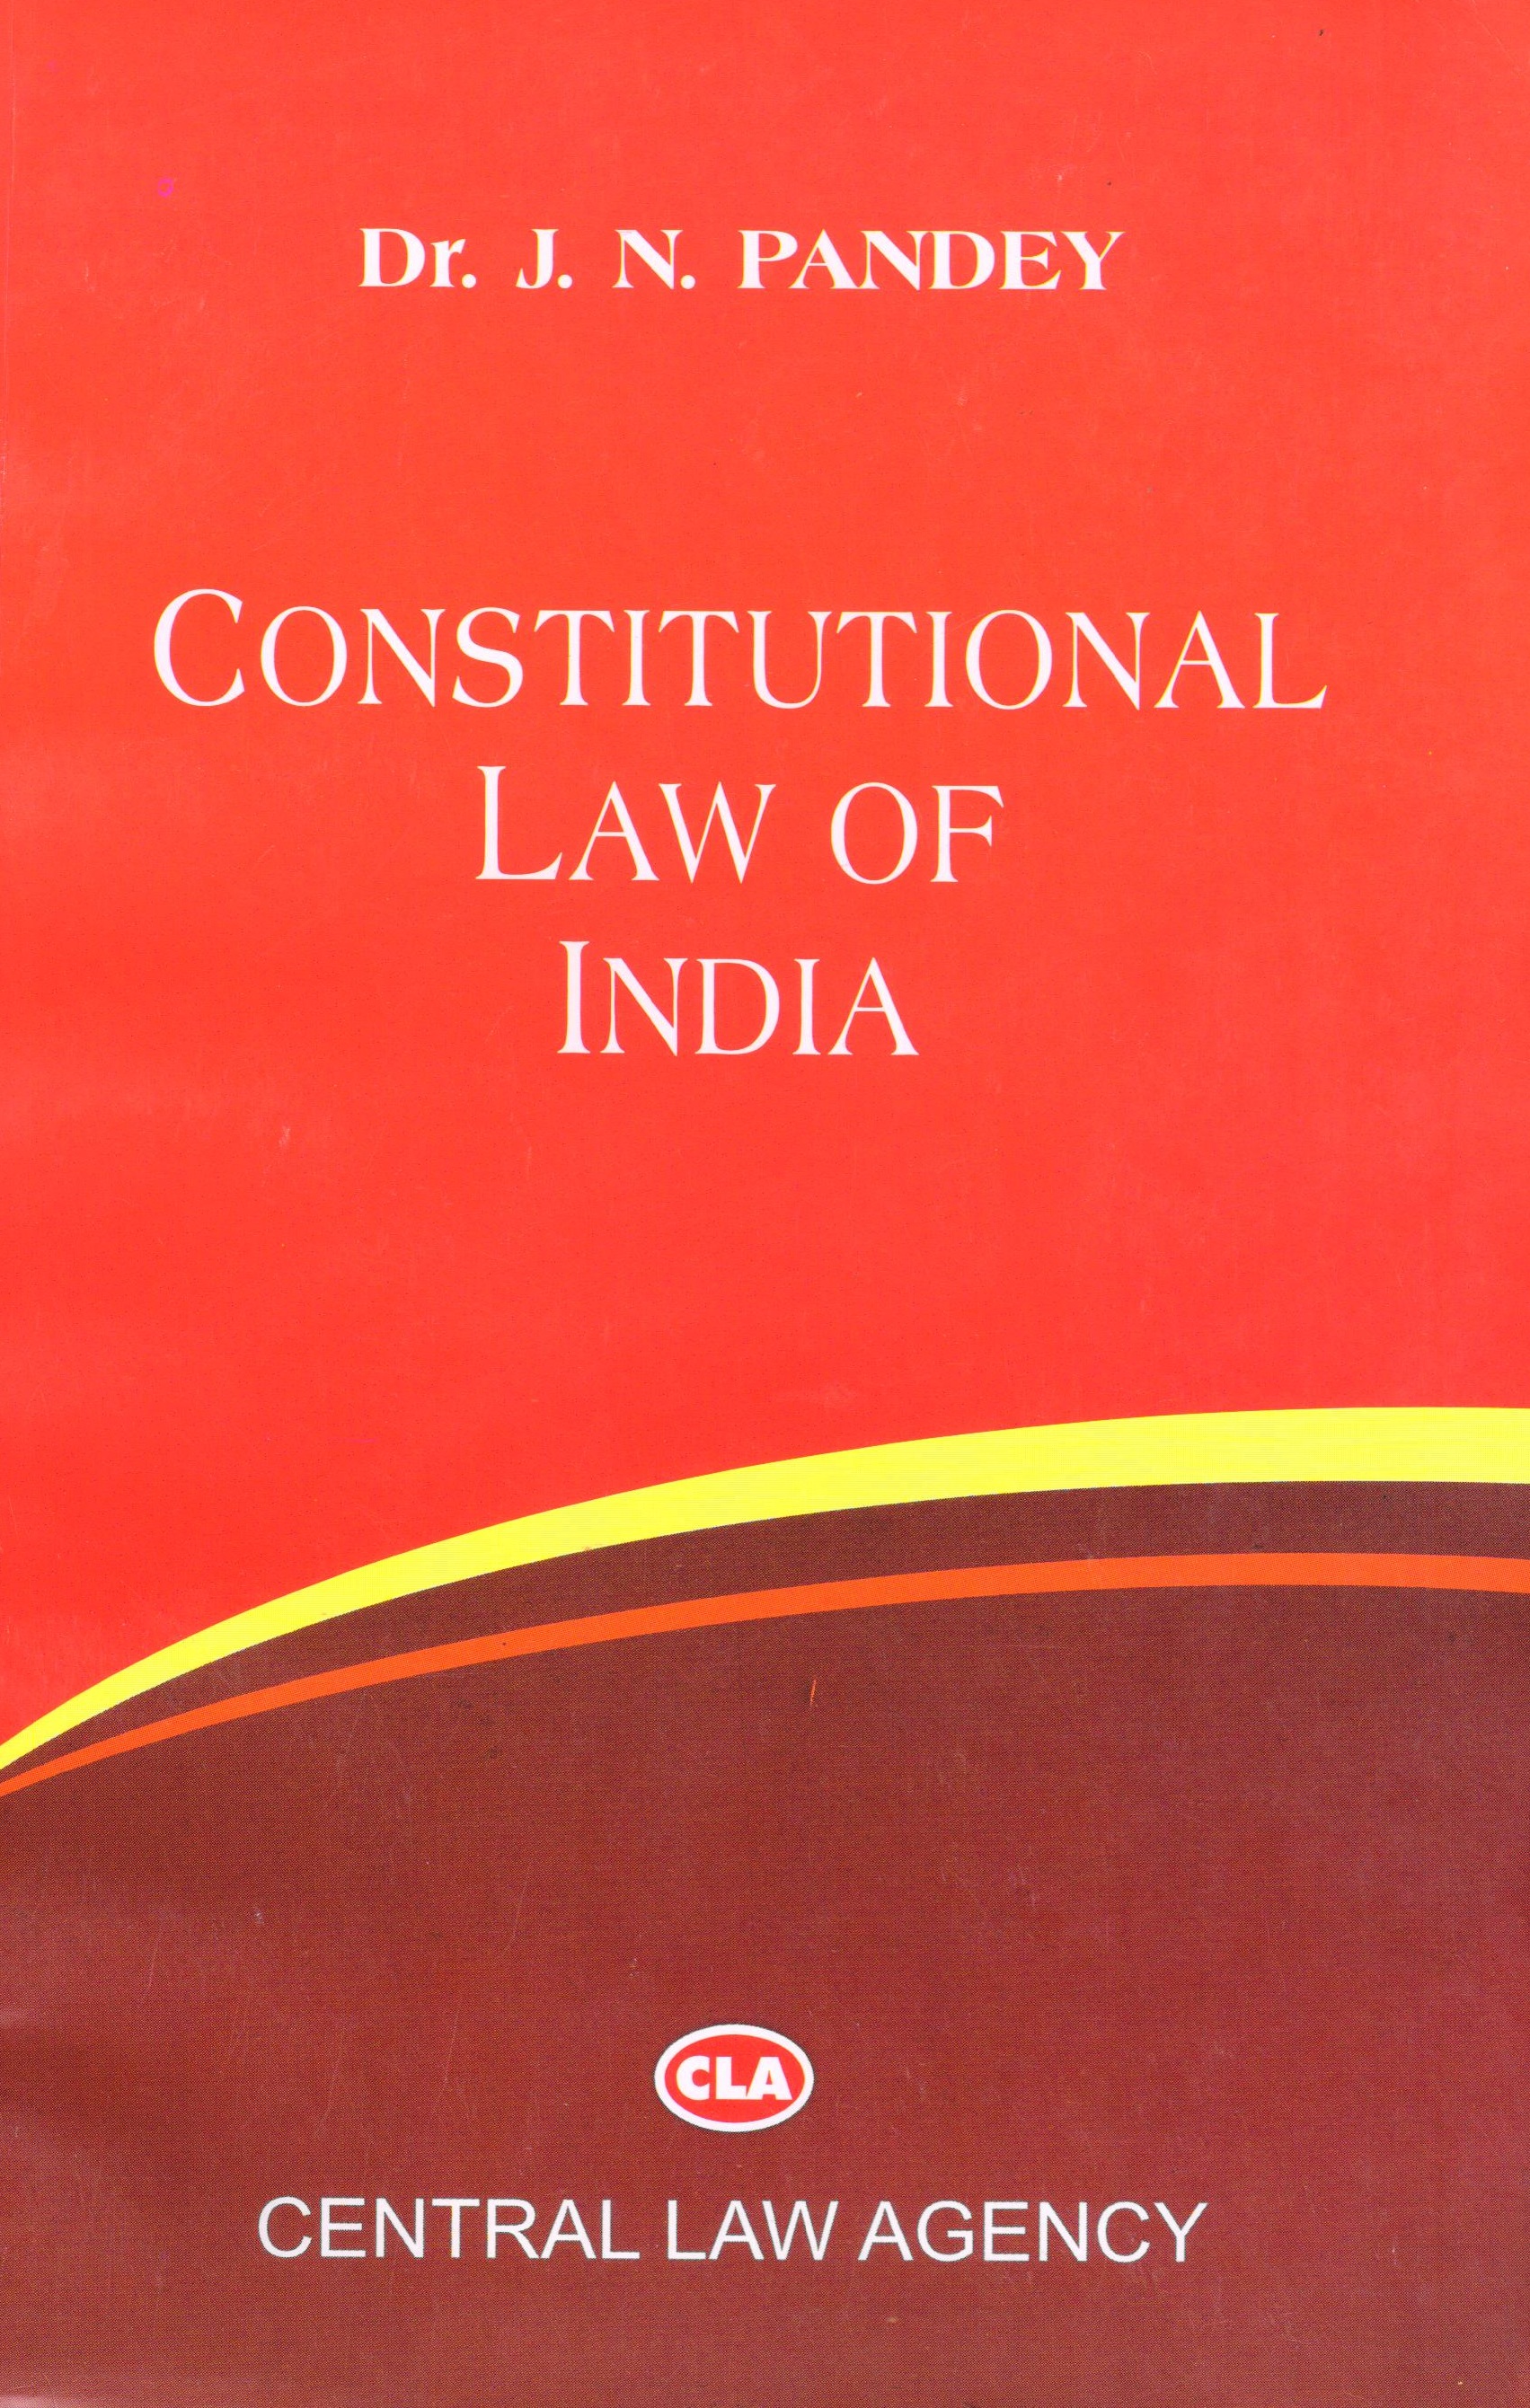 constitutional law by jn pandey pdf